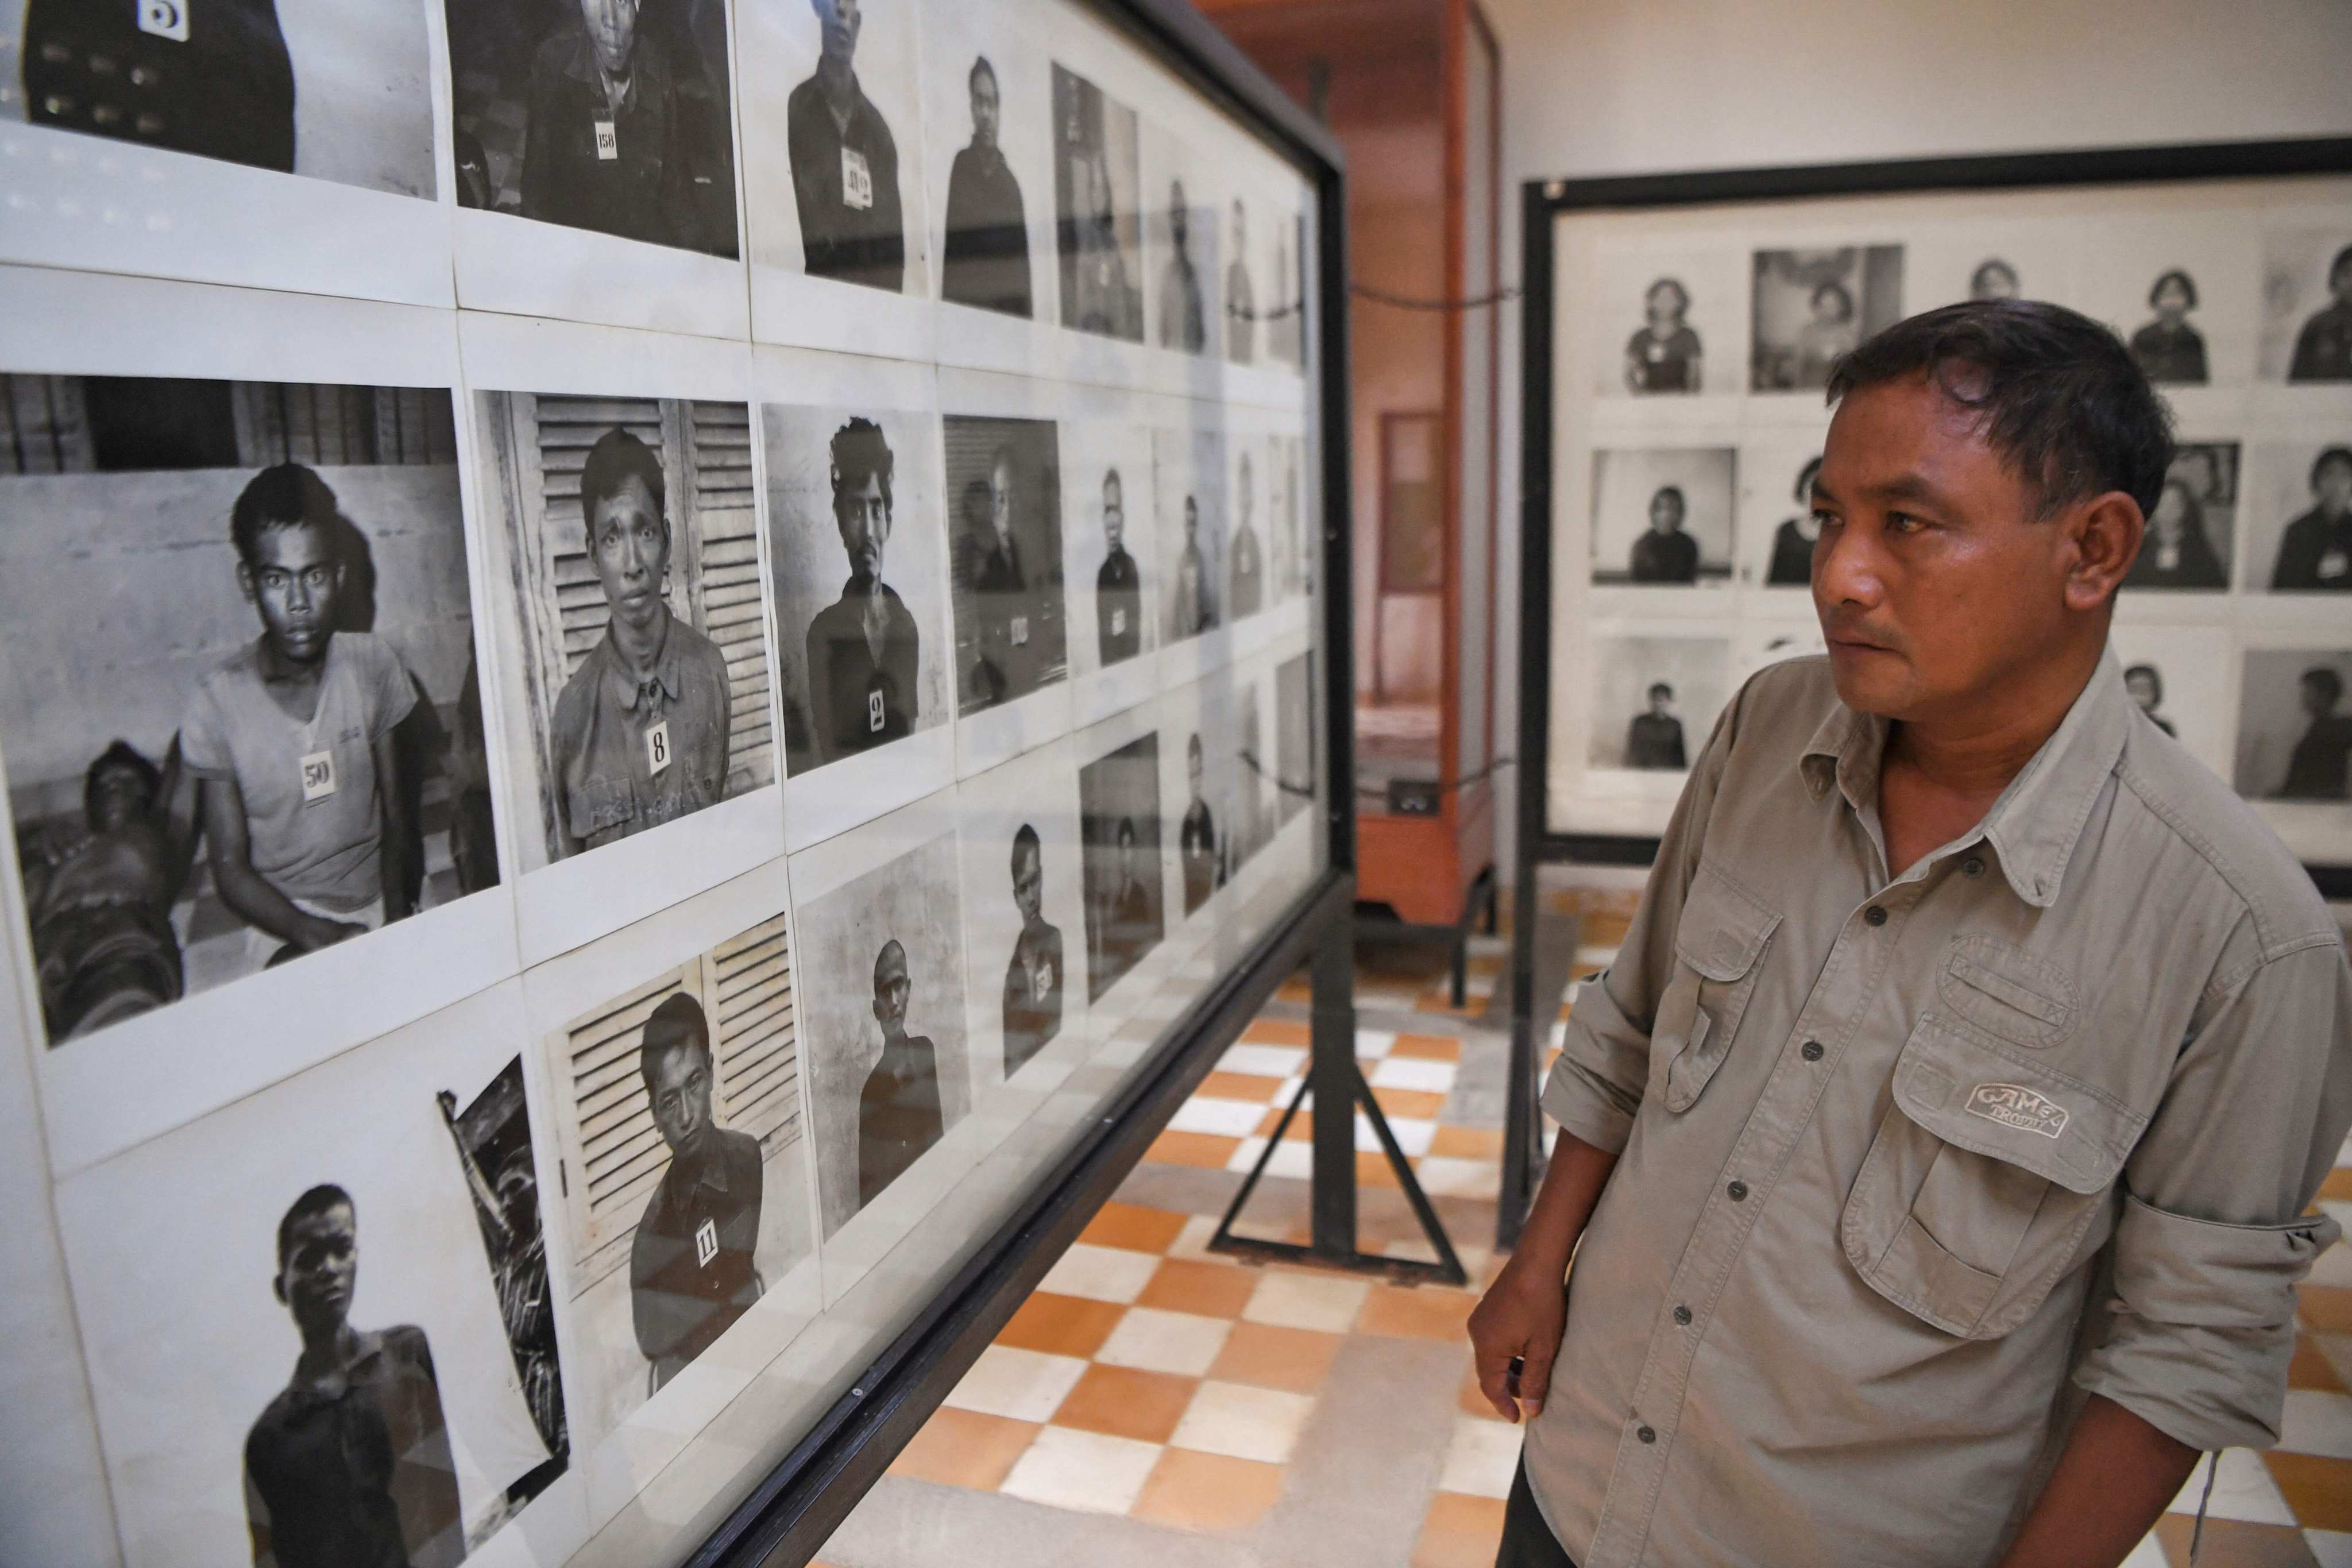 A man looks at portraits of victims displayed at the Tuol Sleng Genocide Museum, formerly a prison where thousands of Cambodians died during the brutal 1975-79 regime, in Phnom Penh, in 2020. Photo: AFP